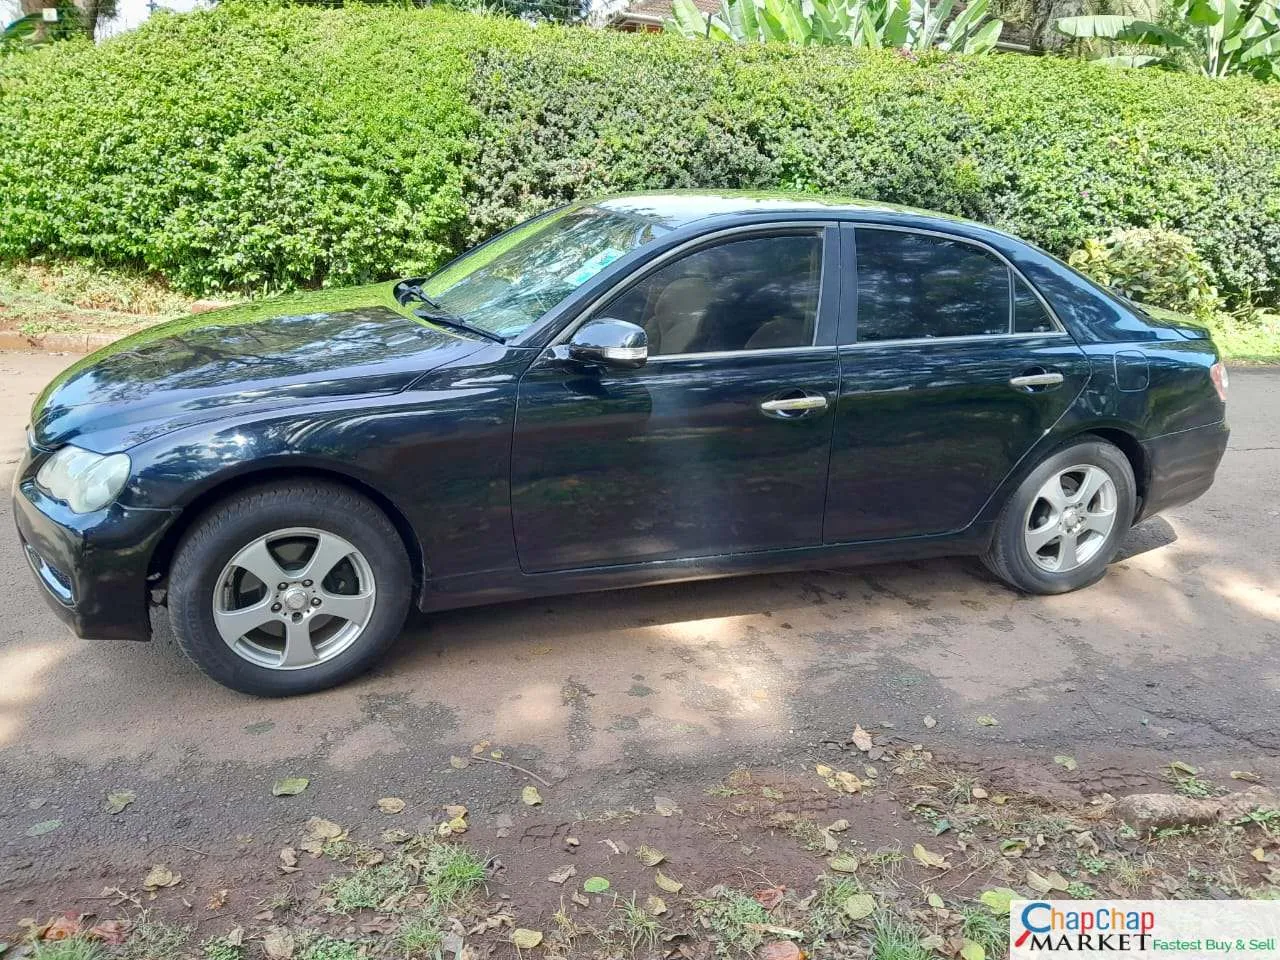 Cars Cars For Sale-Toyota Mark X QUICK SALE You Pay 30% Deposit Trade in OK For Sale in Kenya HIRE PURCHASE INSTALLMENTS EXCLUSIVE 7